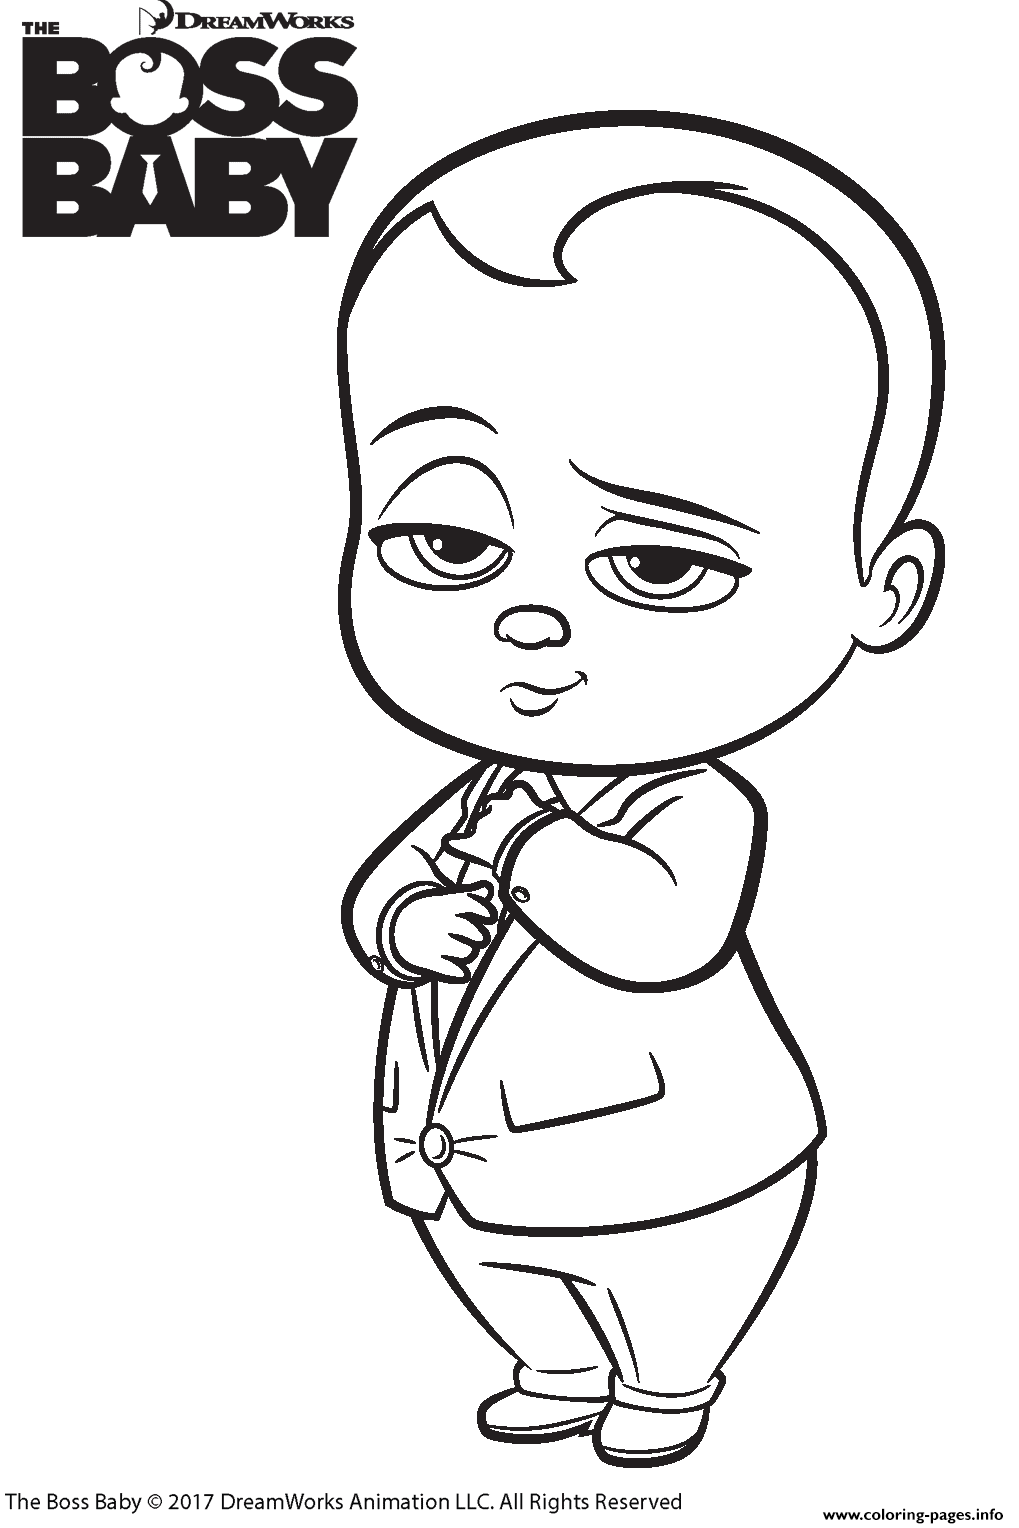 The Boss Baby 2 coloring